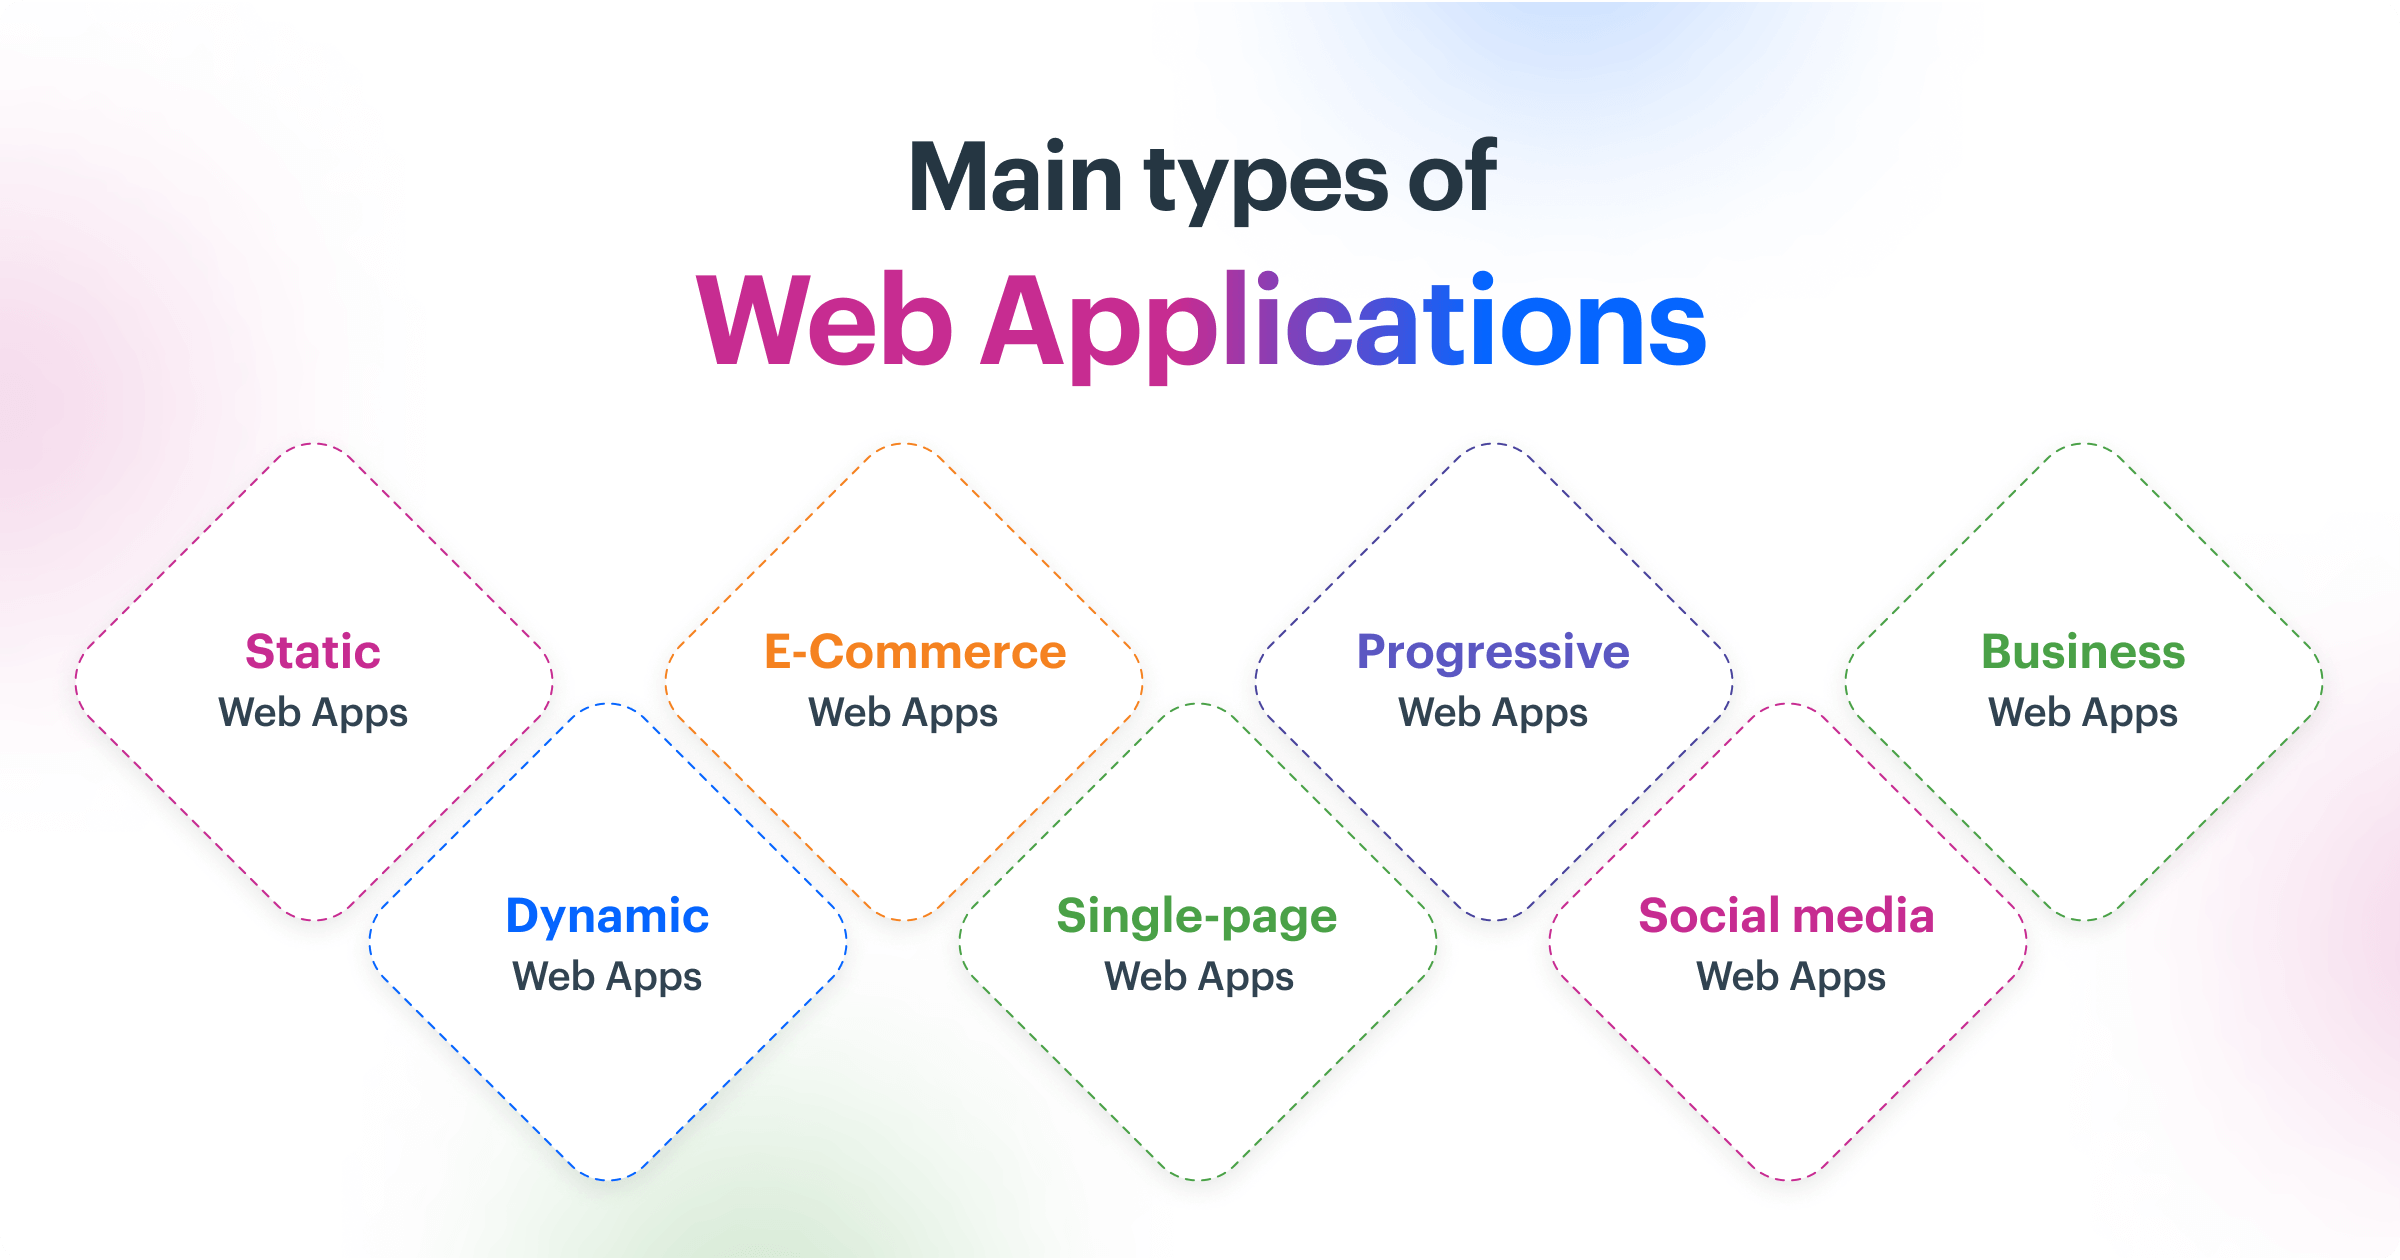 How to Build a Web Application in 12 Simple Steps - Kissflow